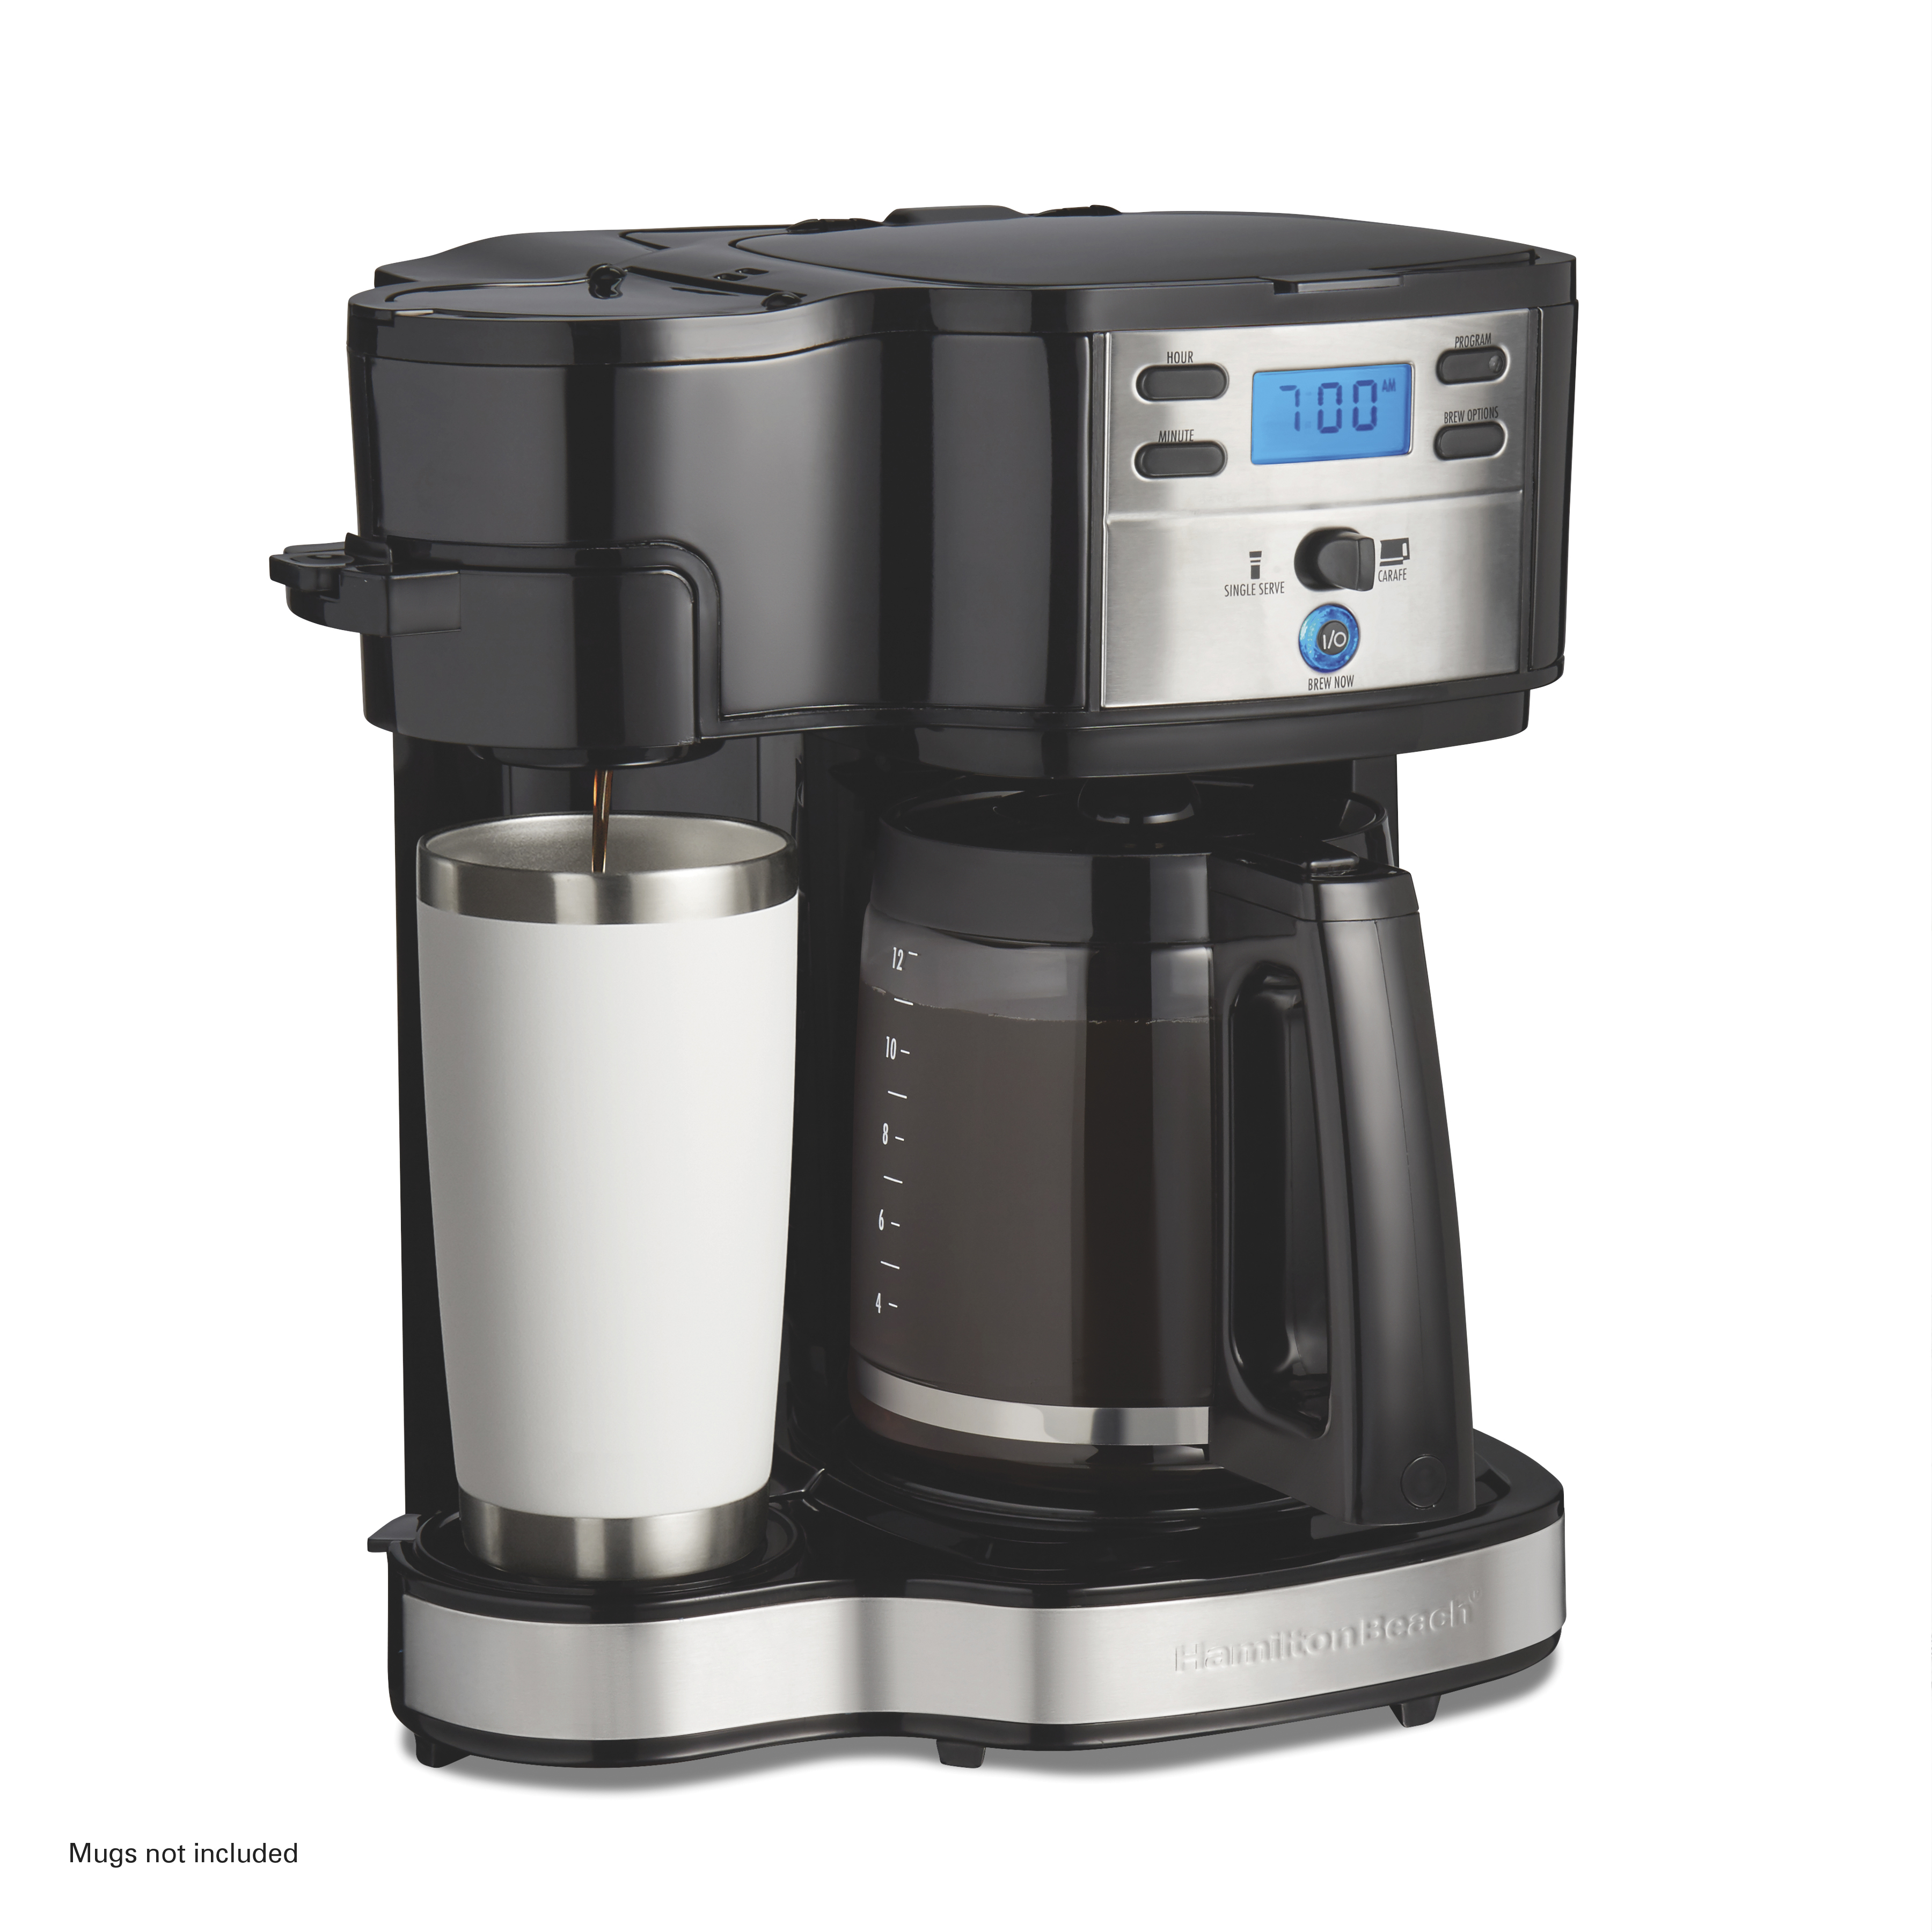 Hamilton Beach 2-Way Programmable Coffee Maker, Single-Serve and 12-Cup Pot, Glass Carafe, Stainless Steel, New, 47650 - image 3 of 9